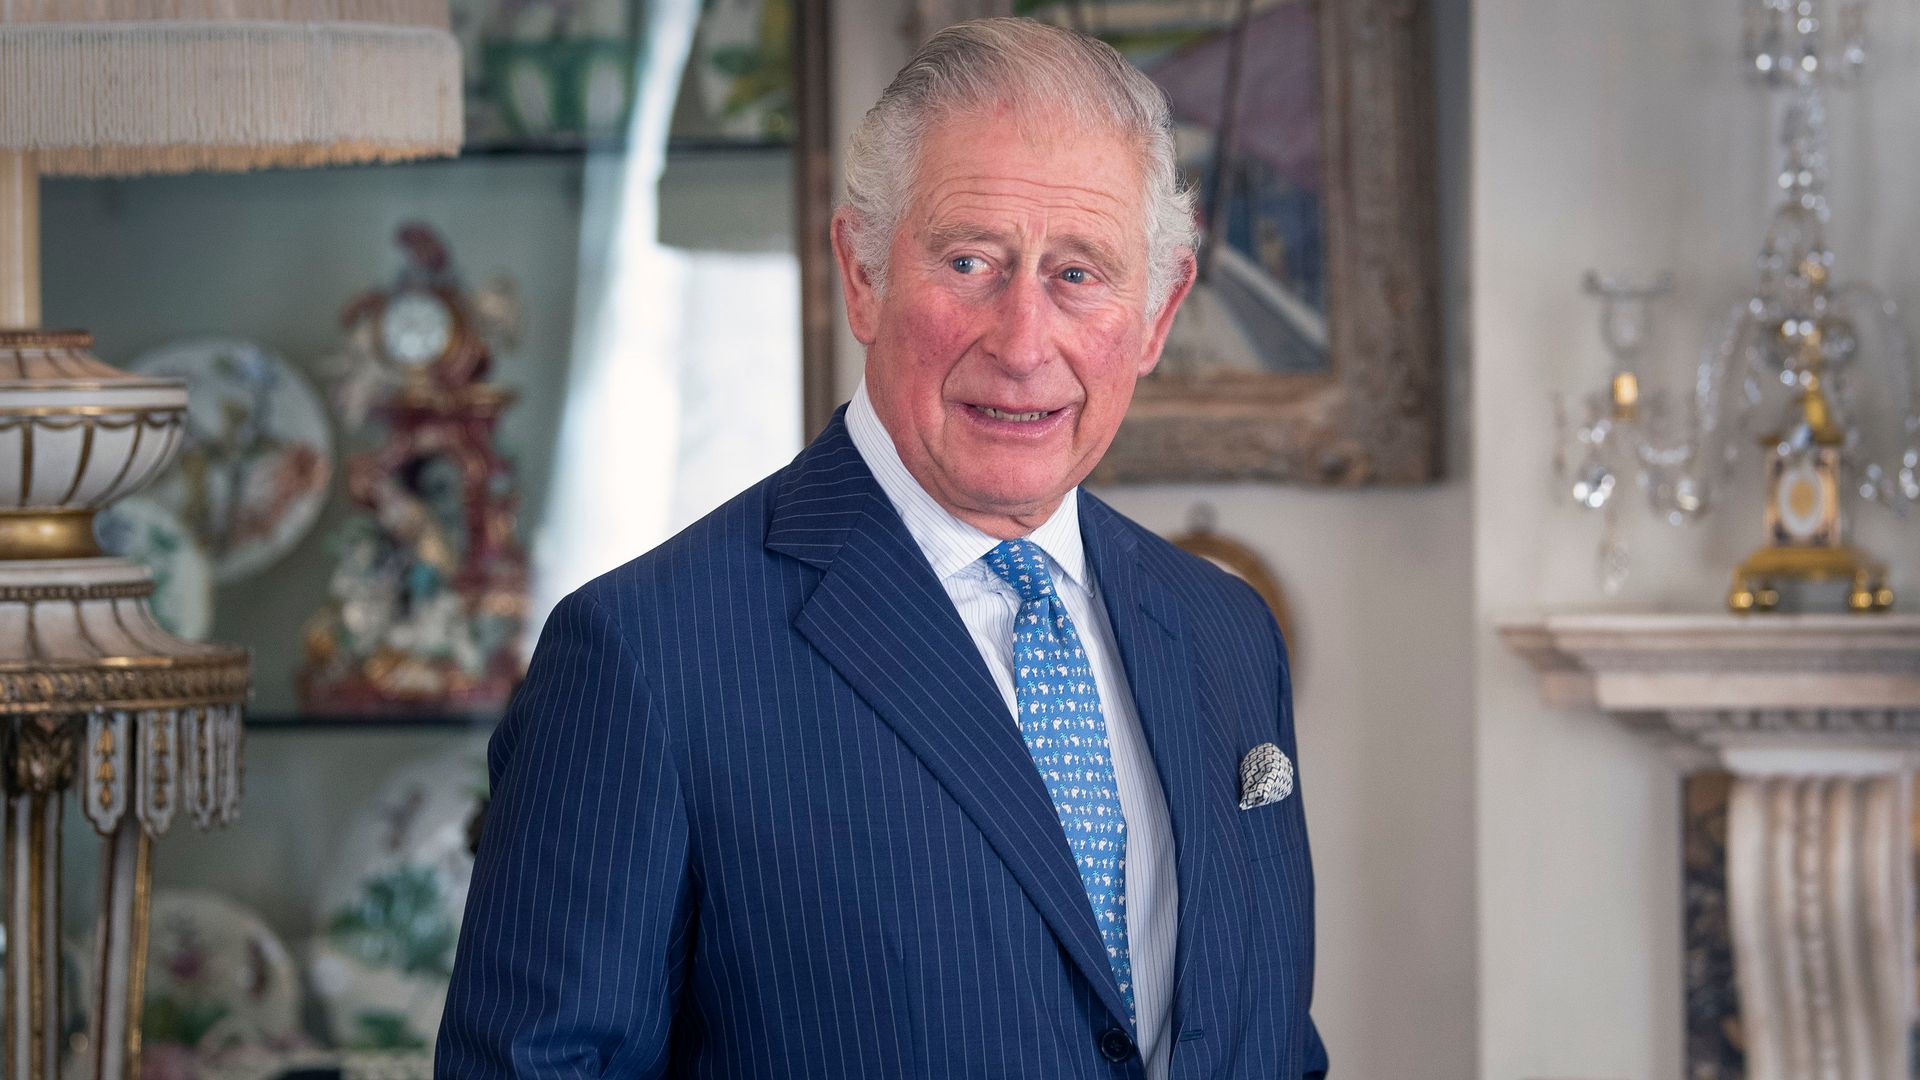 King Charles III at home in Clarence House